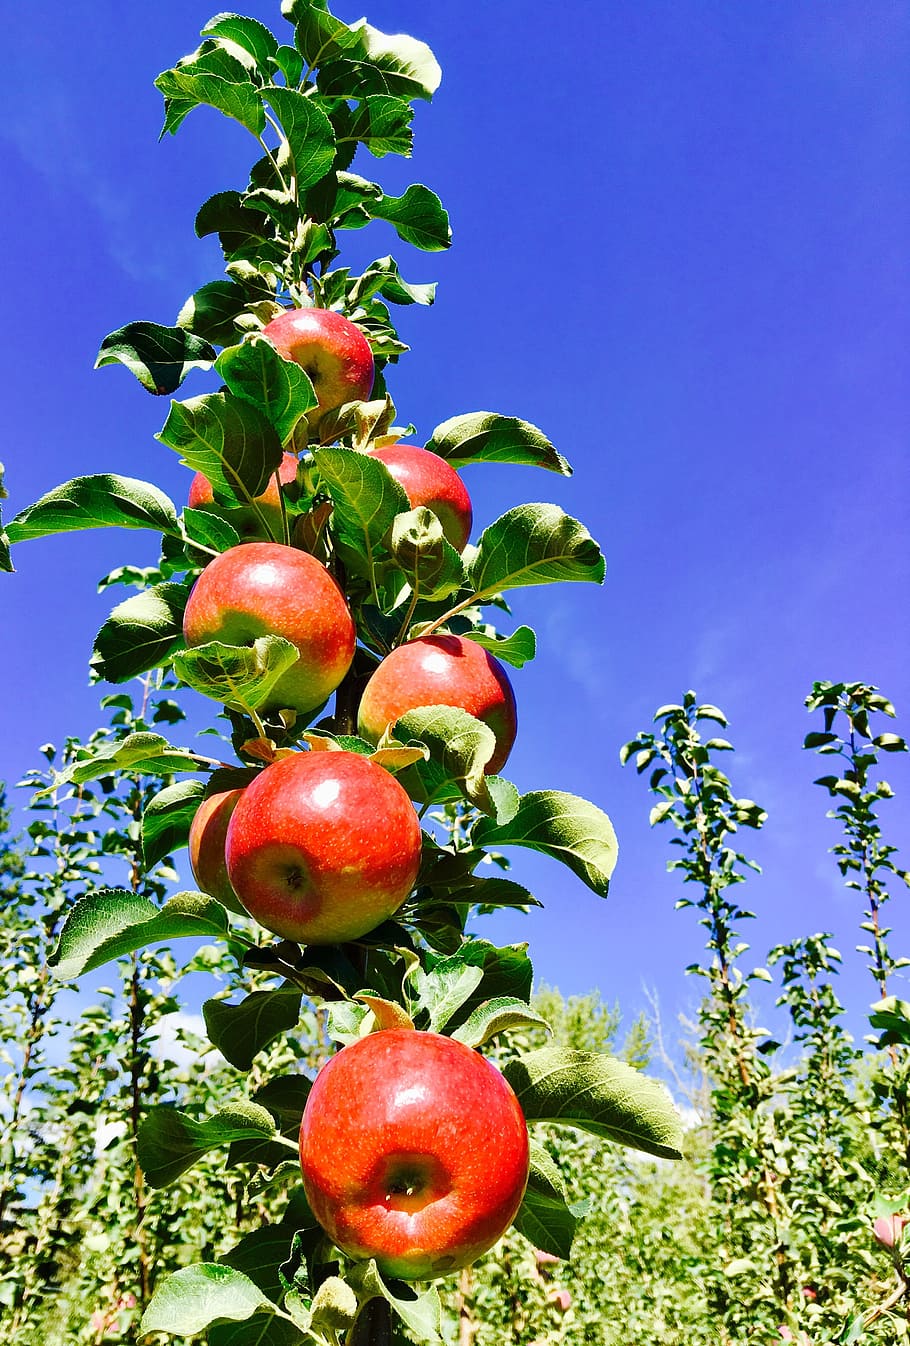 apples, fruit, antioxidants, healthy eating, plant, food and drink, sky, food, growth, tree